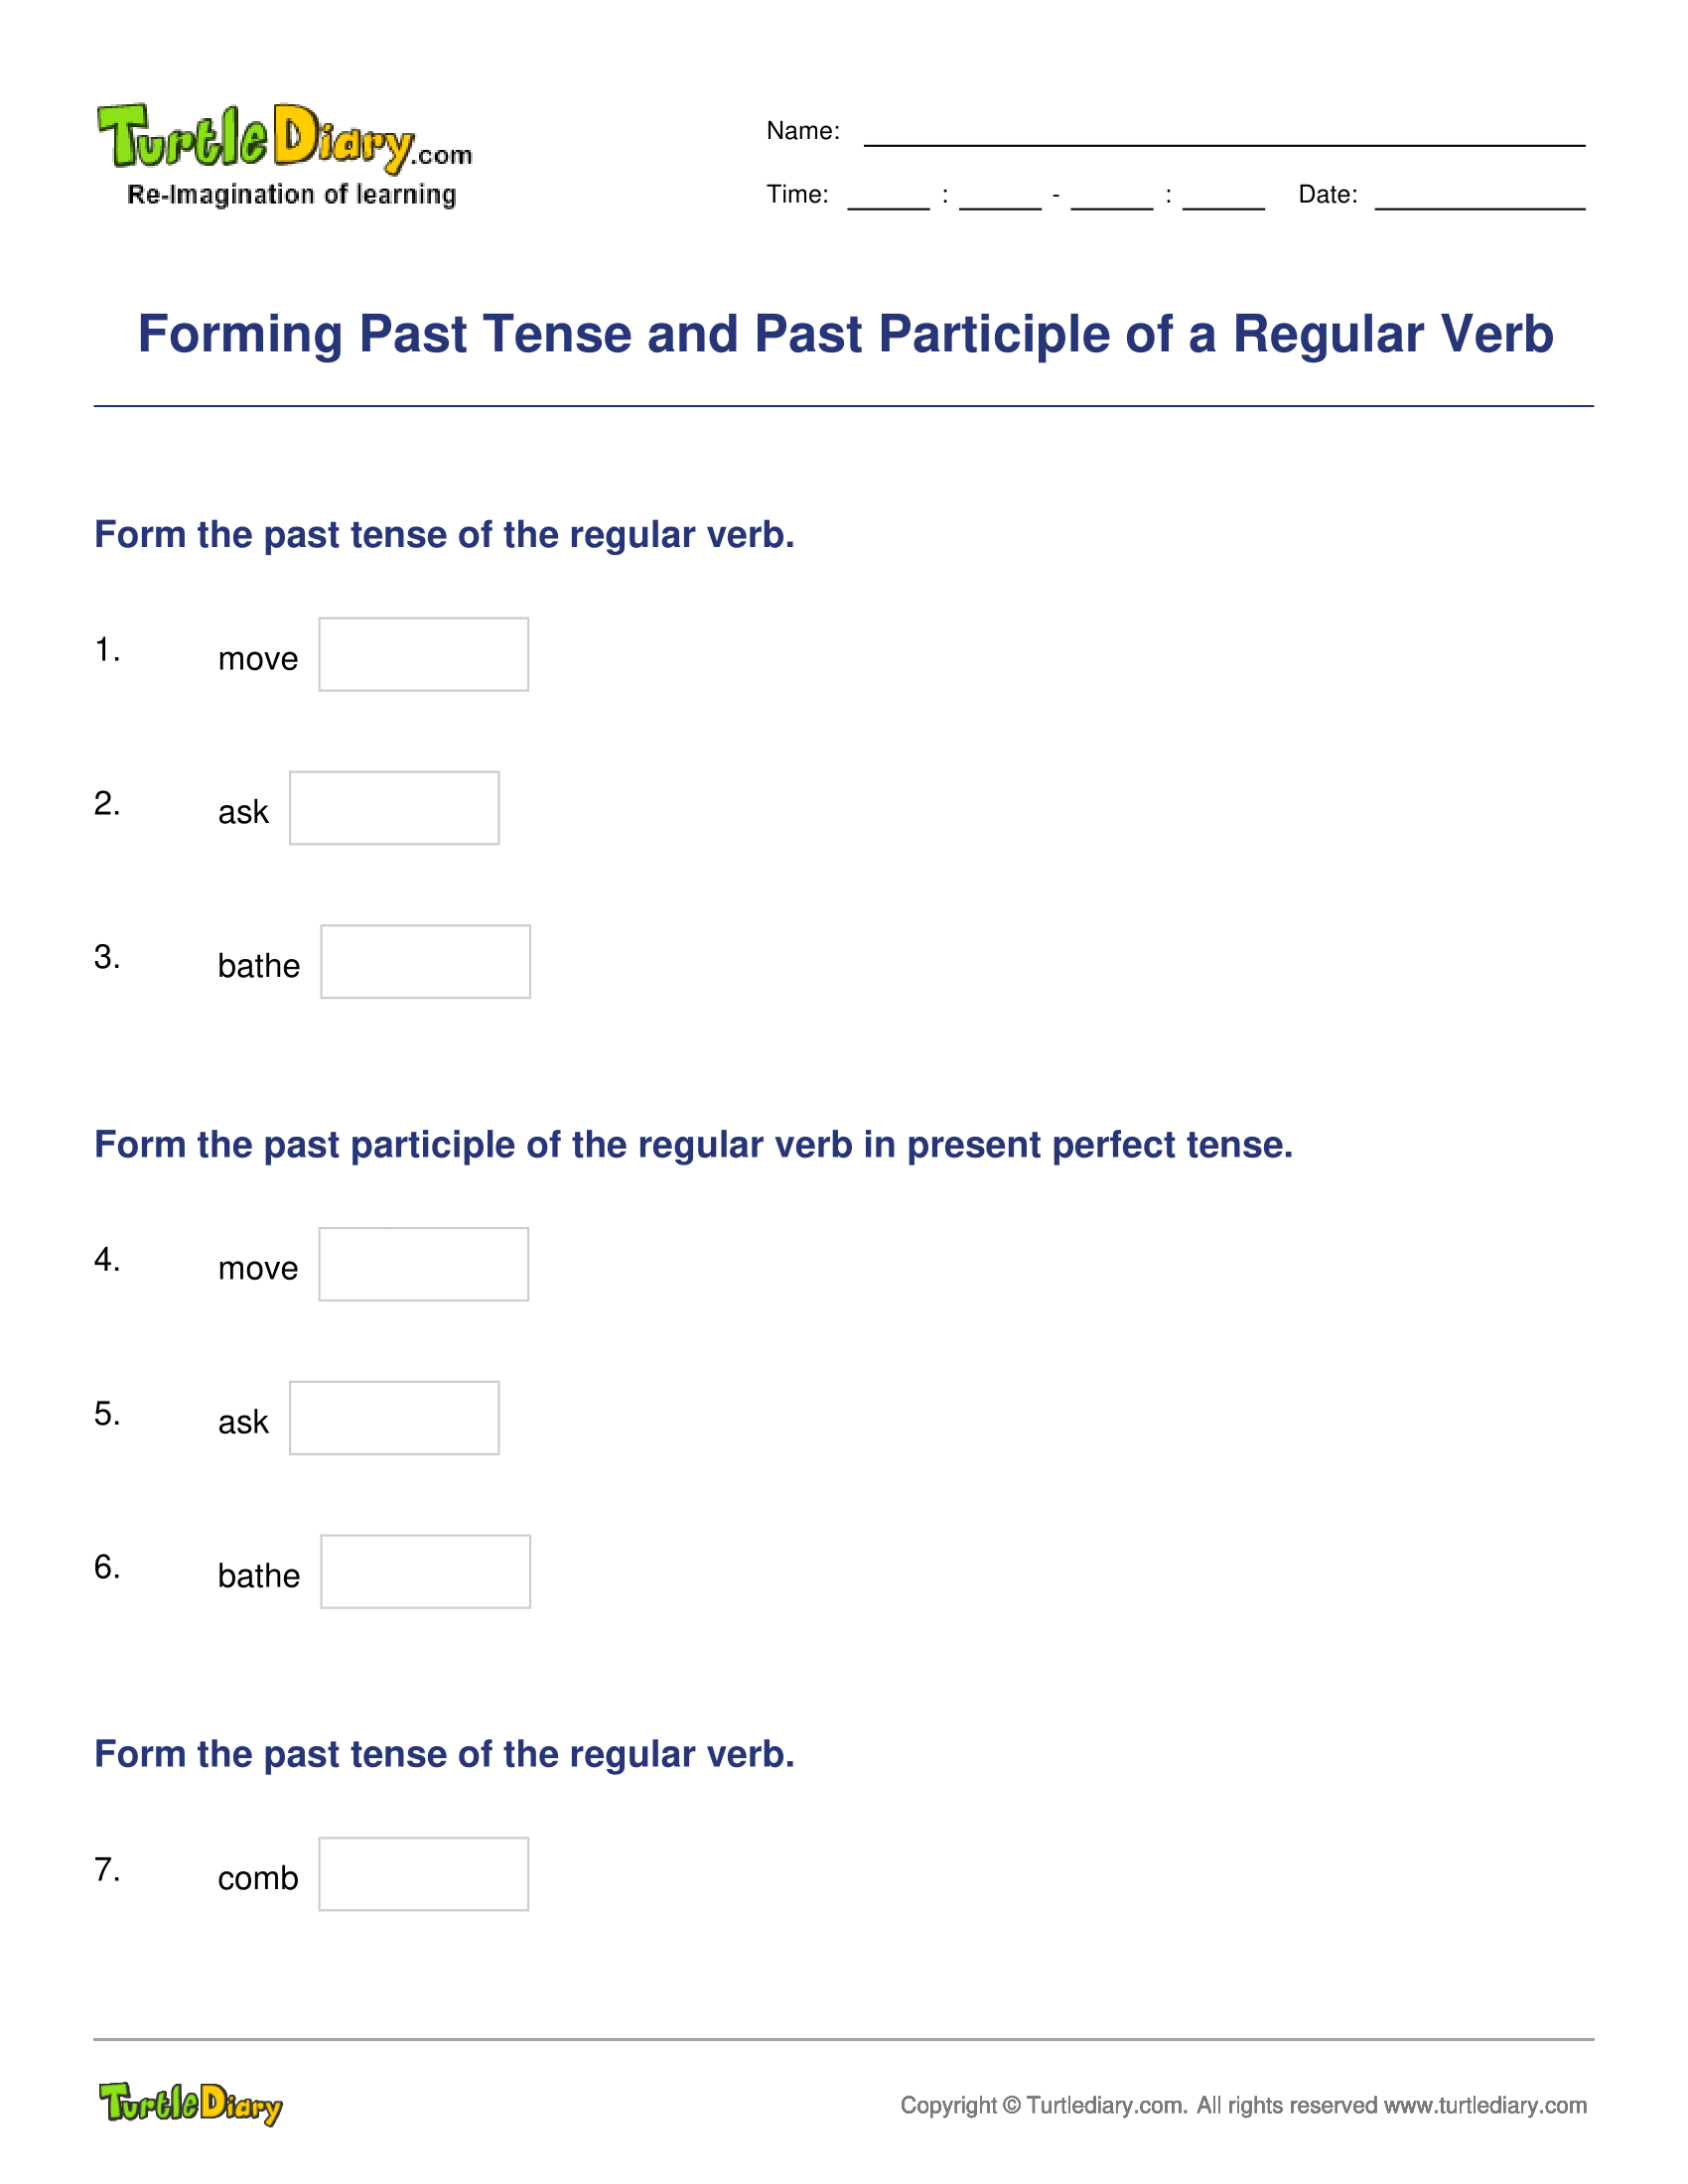 Forming Past Tense and Past Participle of a Regular Verb